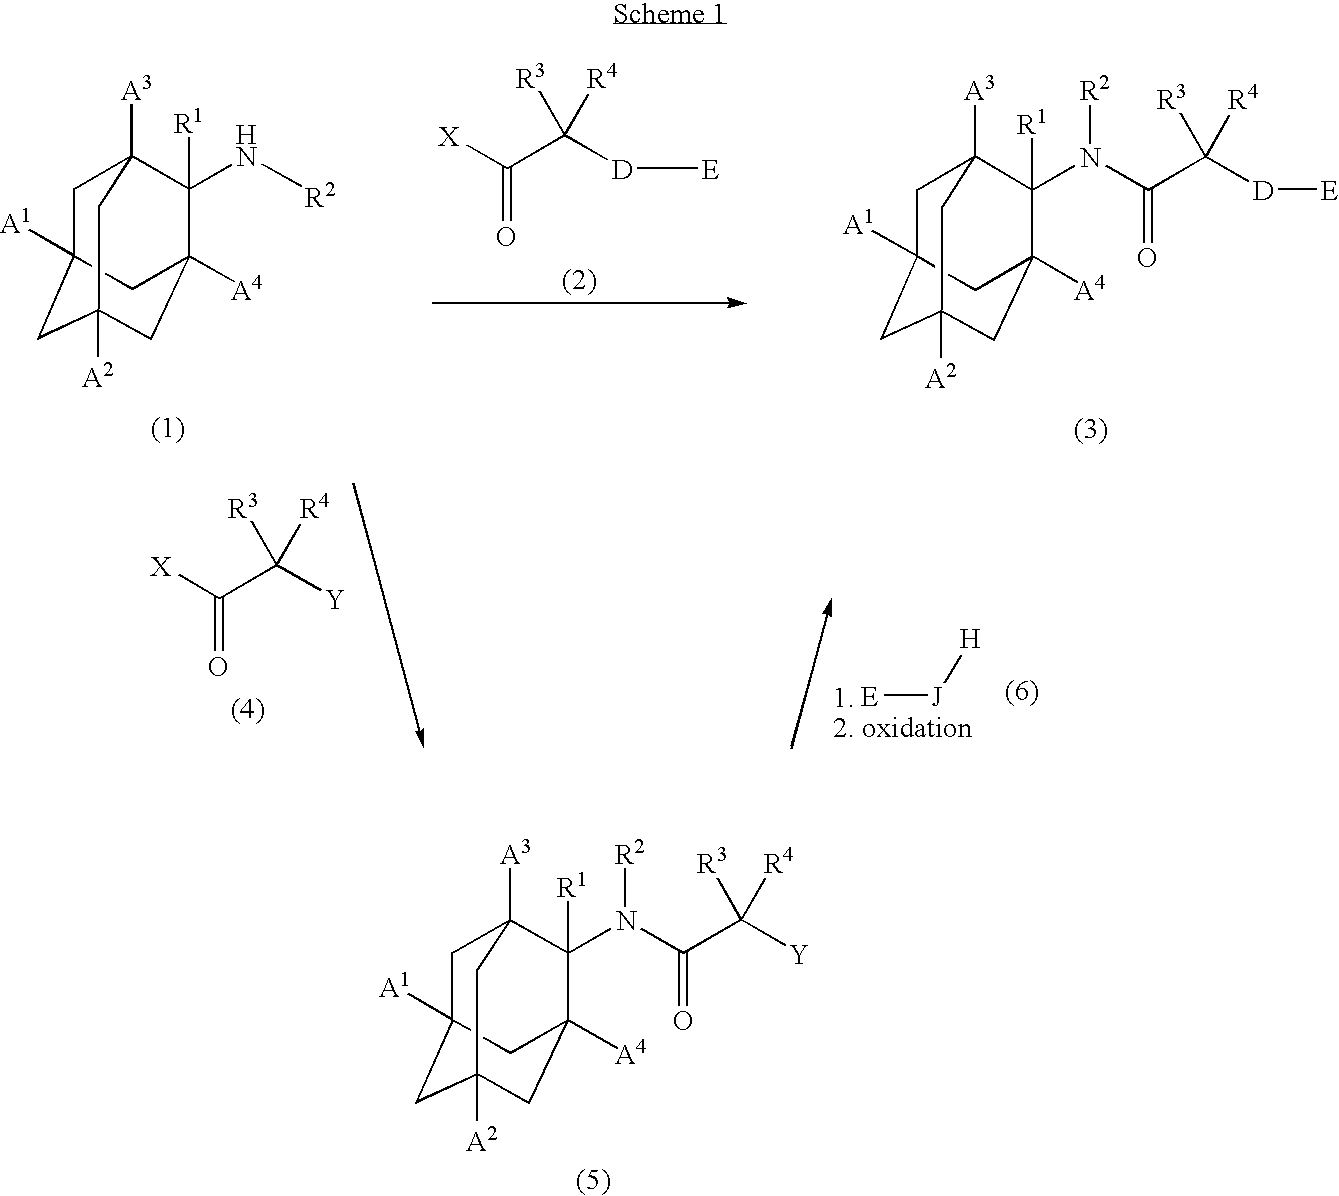 Inhibitors of the 11-beta-hydroxysteroid dehydrogenase type 1 enzyme